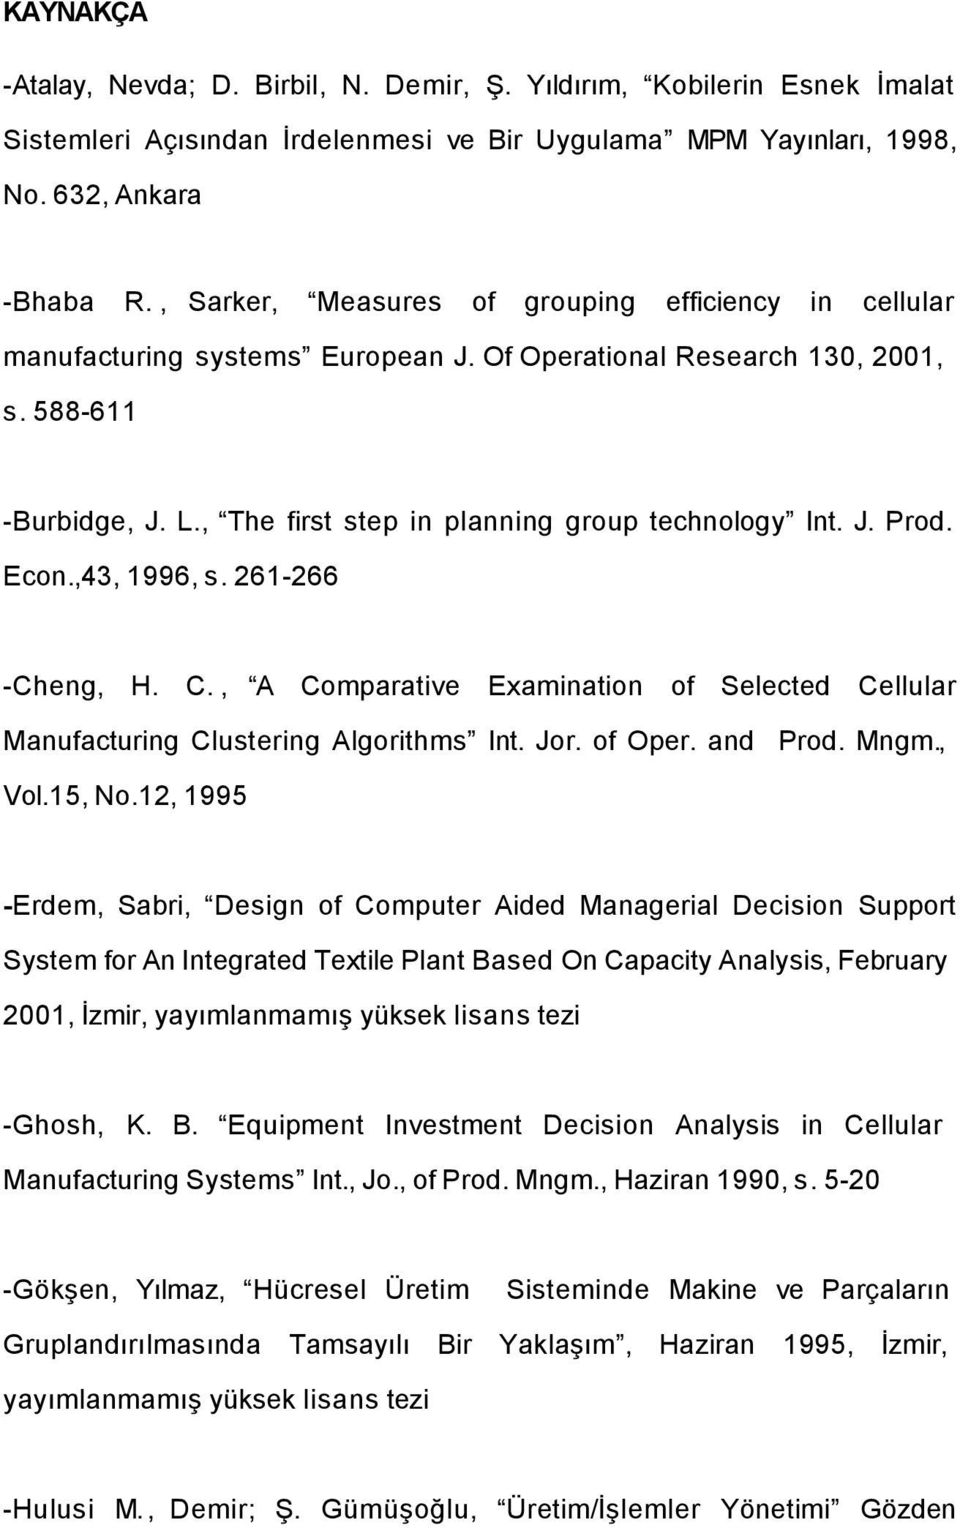 J. Prod. Econ.,43, 1996, s. 261-266 -Cheng, H. C., A Comparative Examination of Selected Cellular Manufacturing Clustering Algorithms Int. Jor. of Oper. and Prod. Mngm., Vol.15, No.